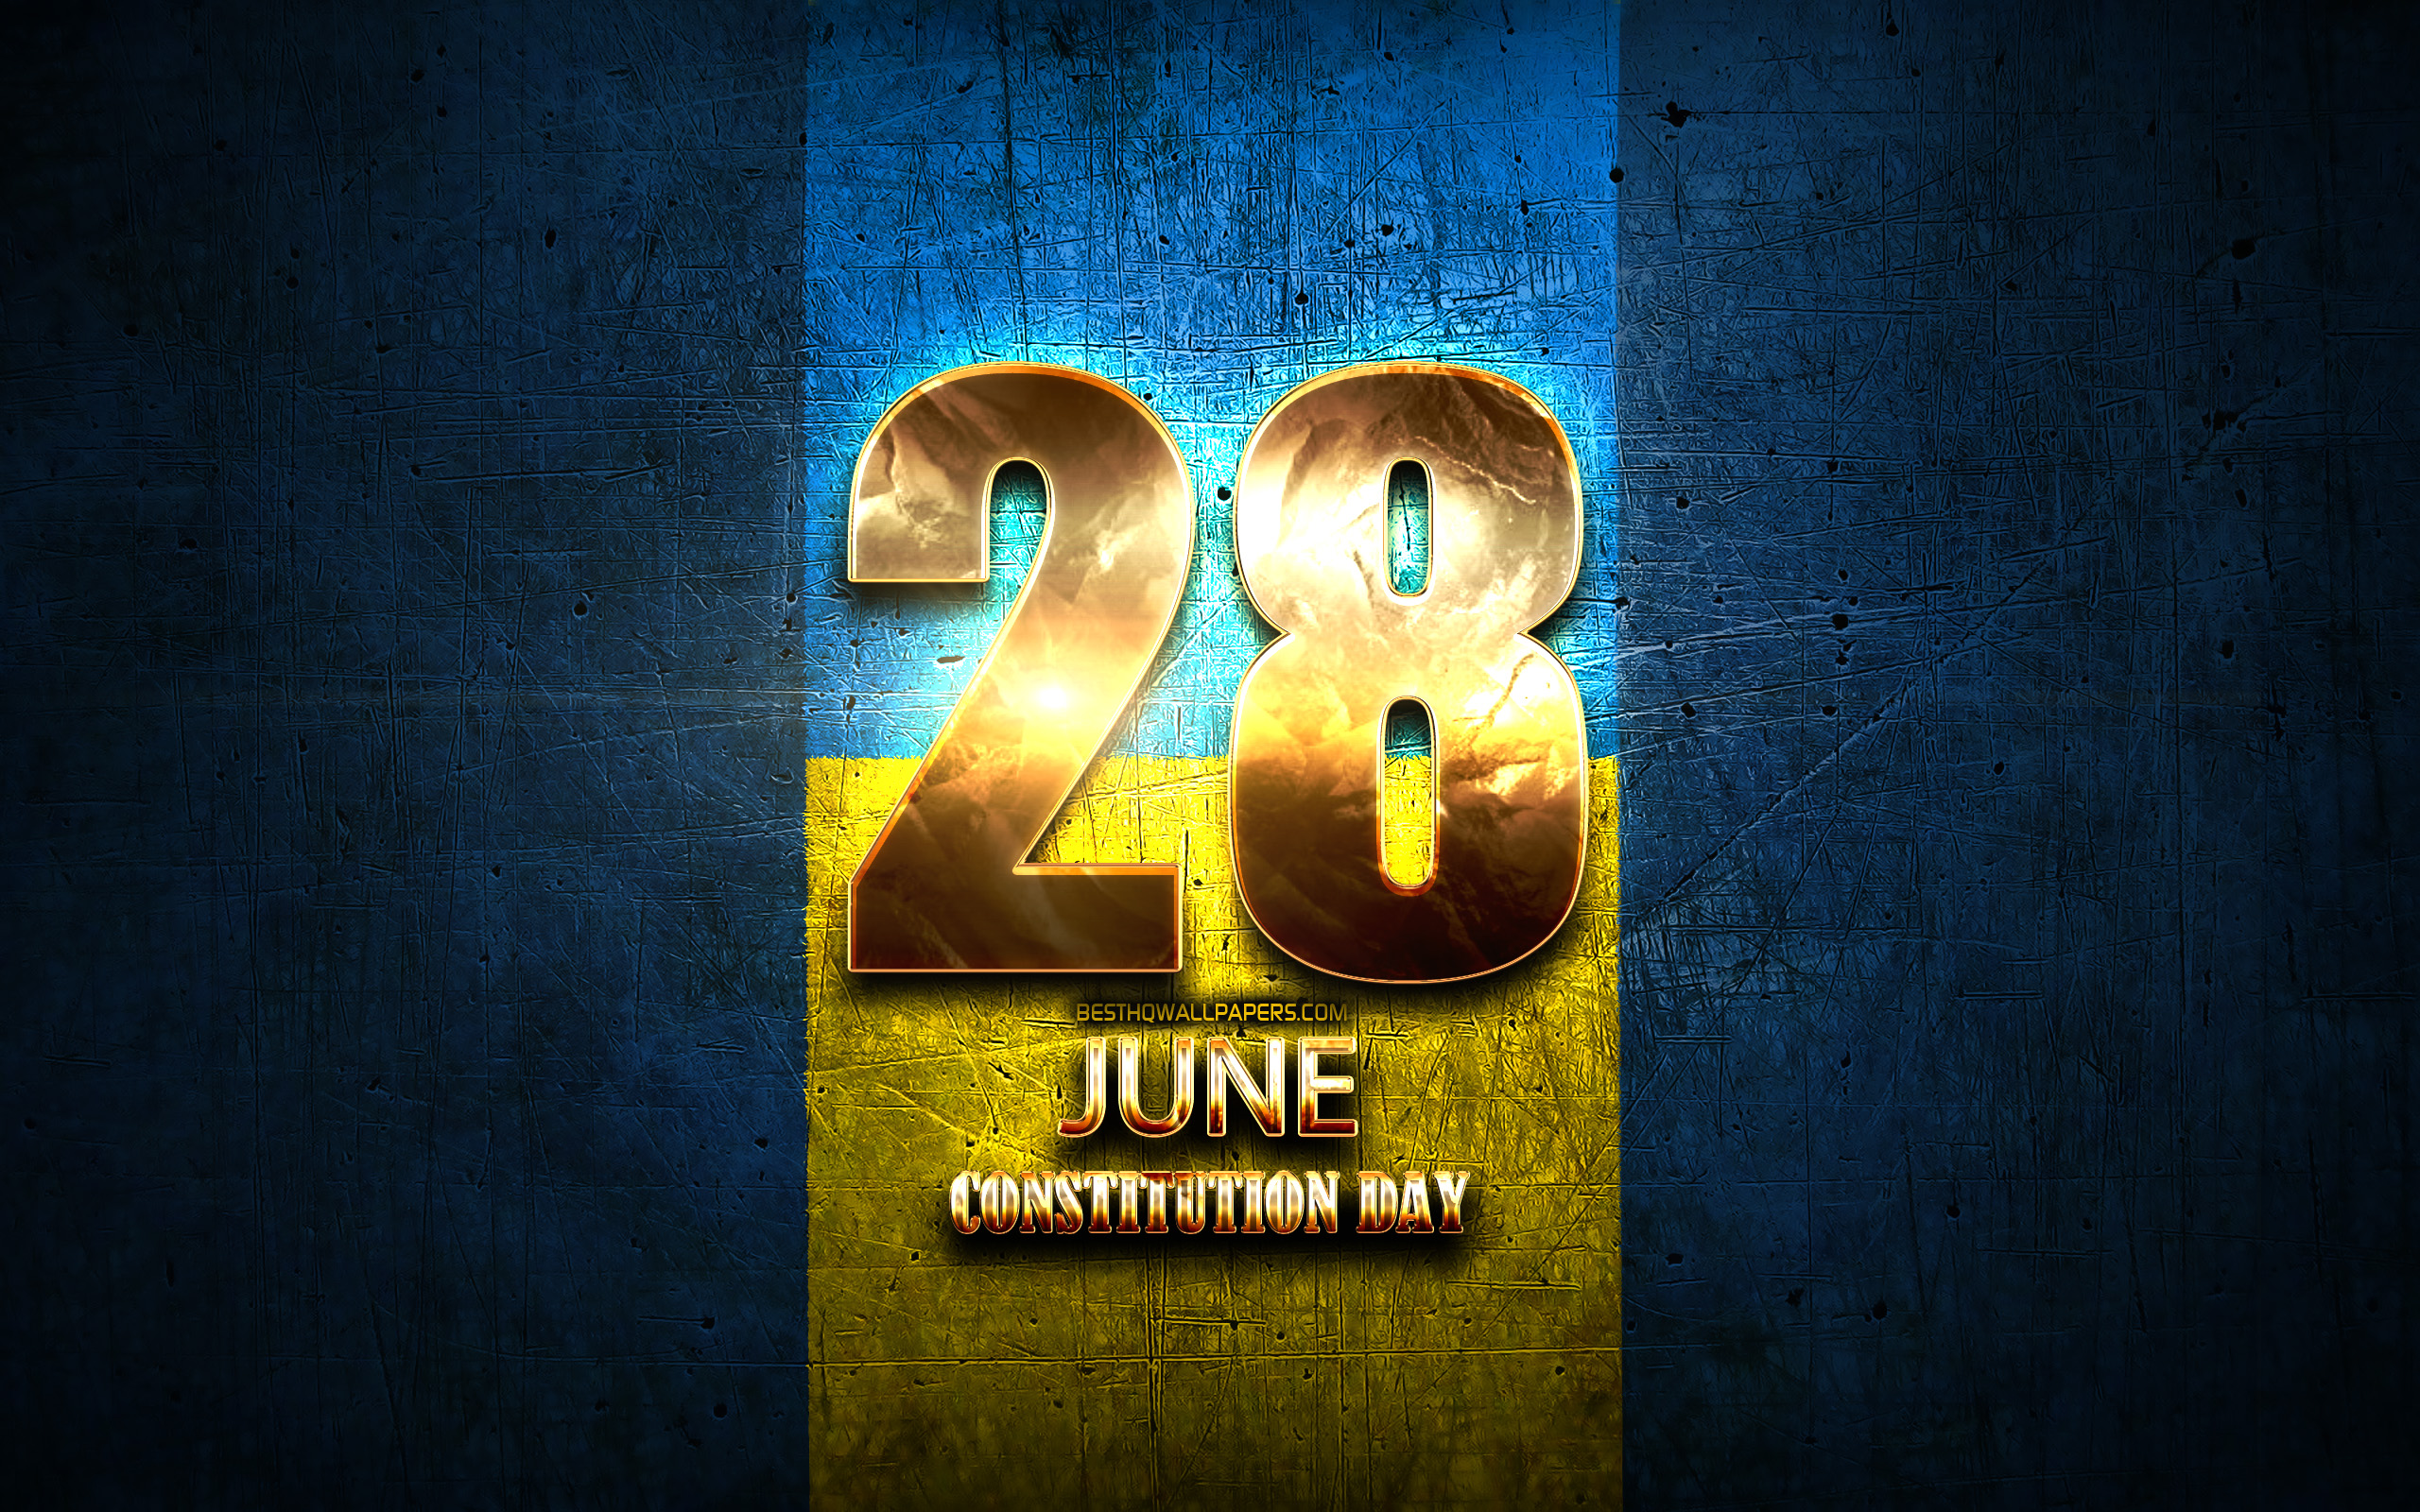 Download wallpaper Constitution Day, June golden signs, ukrainian national holidays, Constitution Day of Ukraine, Ukraine Public Holidays, Ukraine, Europe for desktop with resolution 2560x1600. High Quality HD picture wallpaper